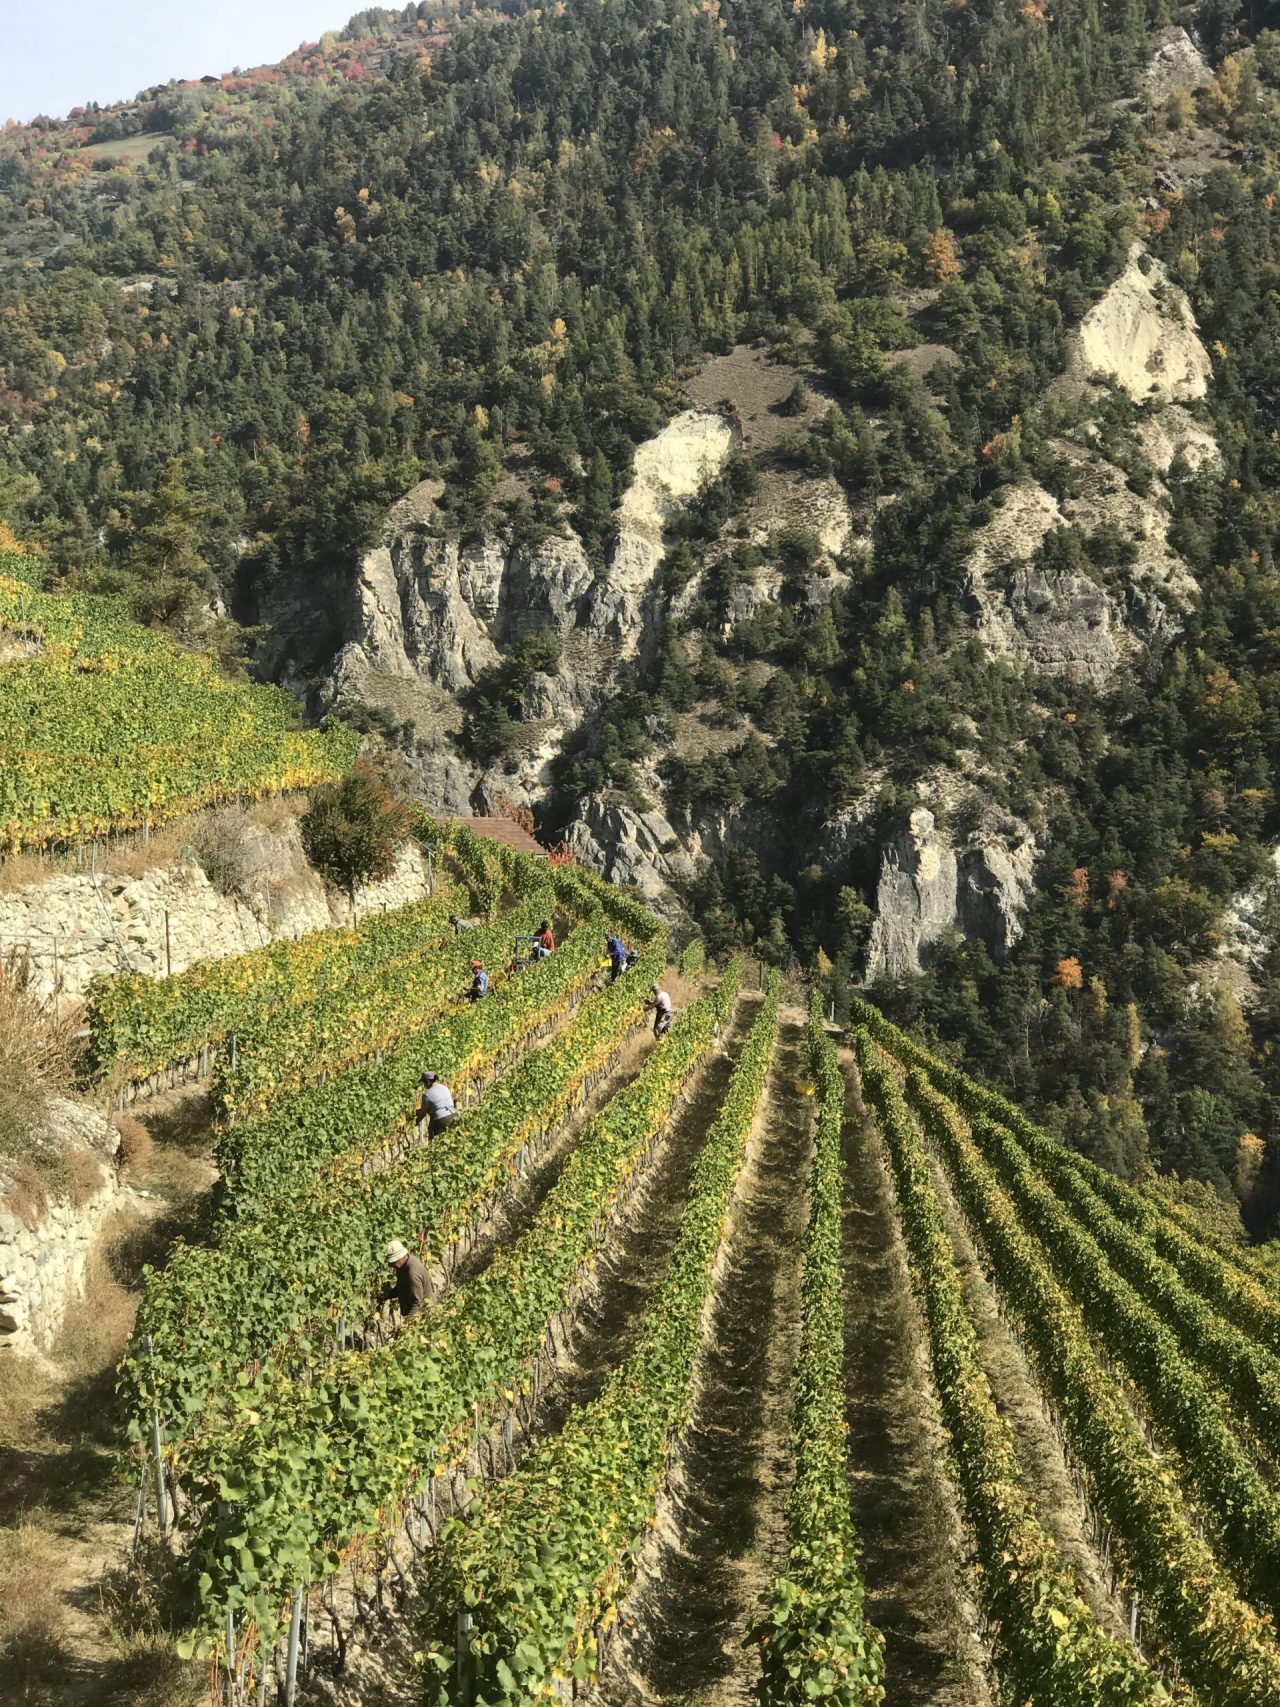 How are wine producers adapting to make the most of mountains?